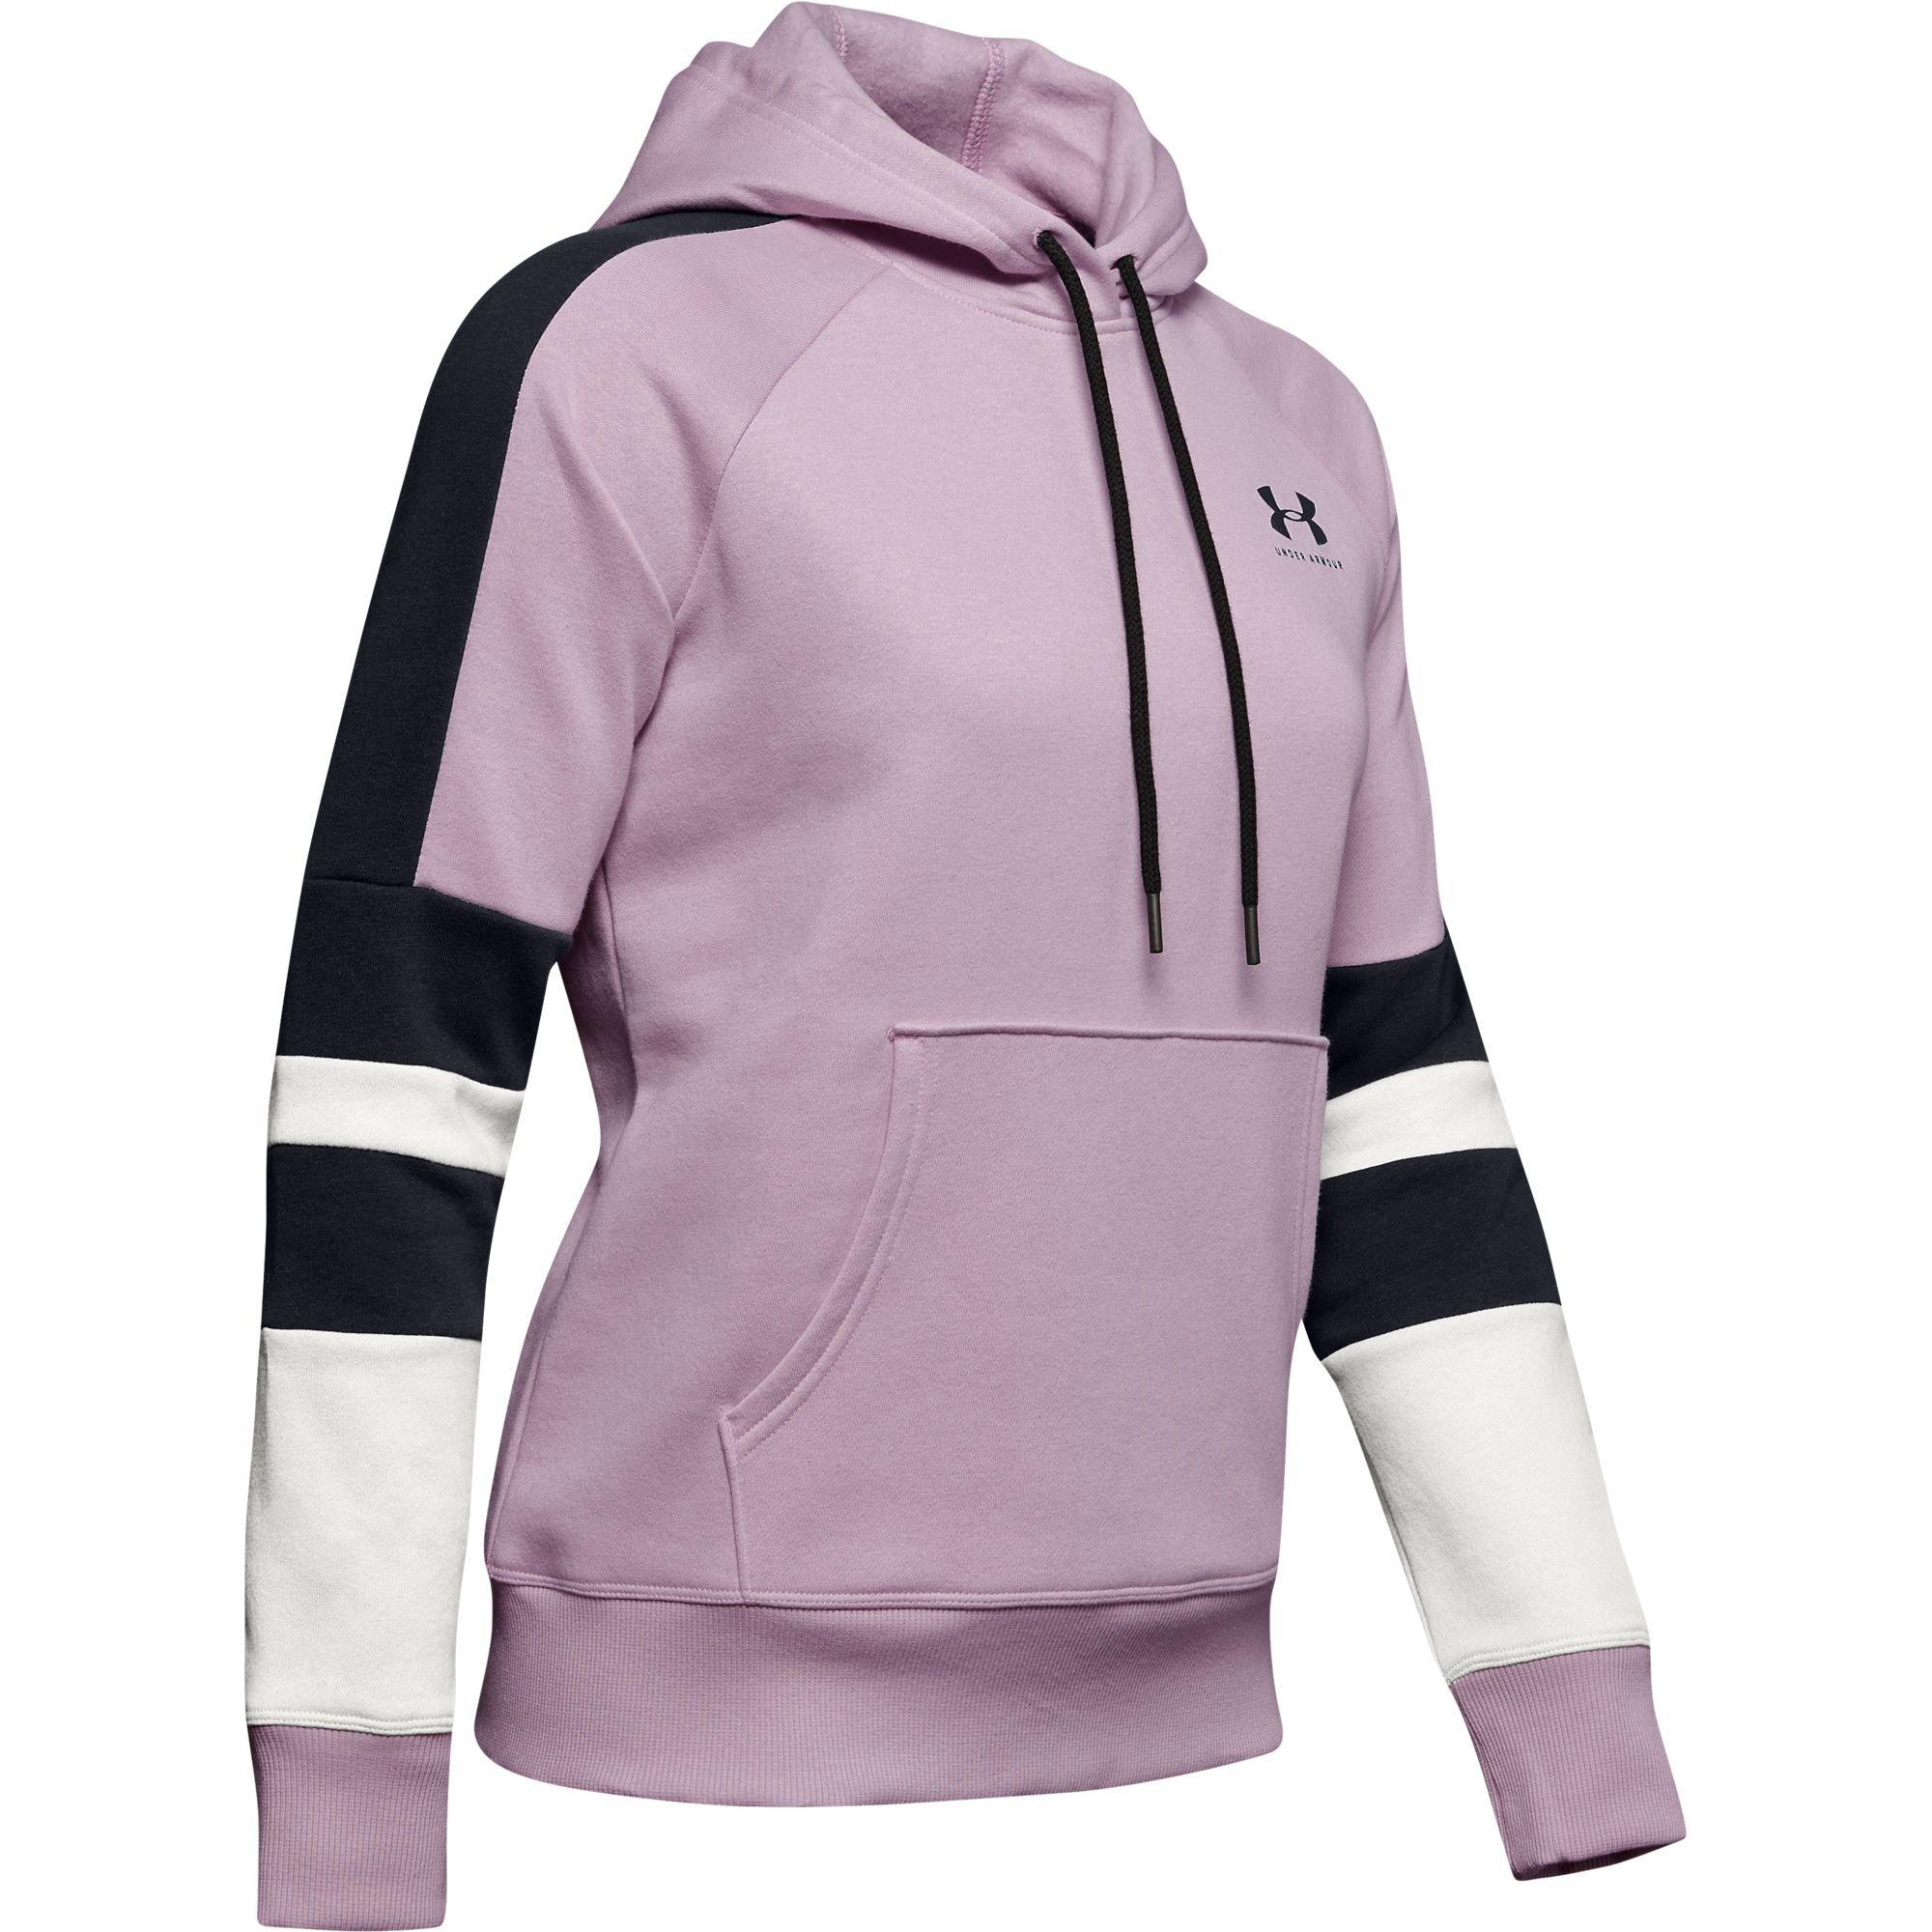 under armour women's hoodies clearance